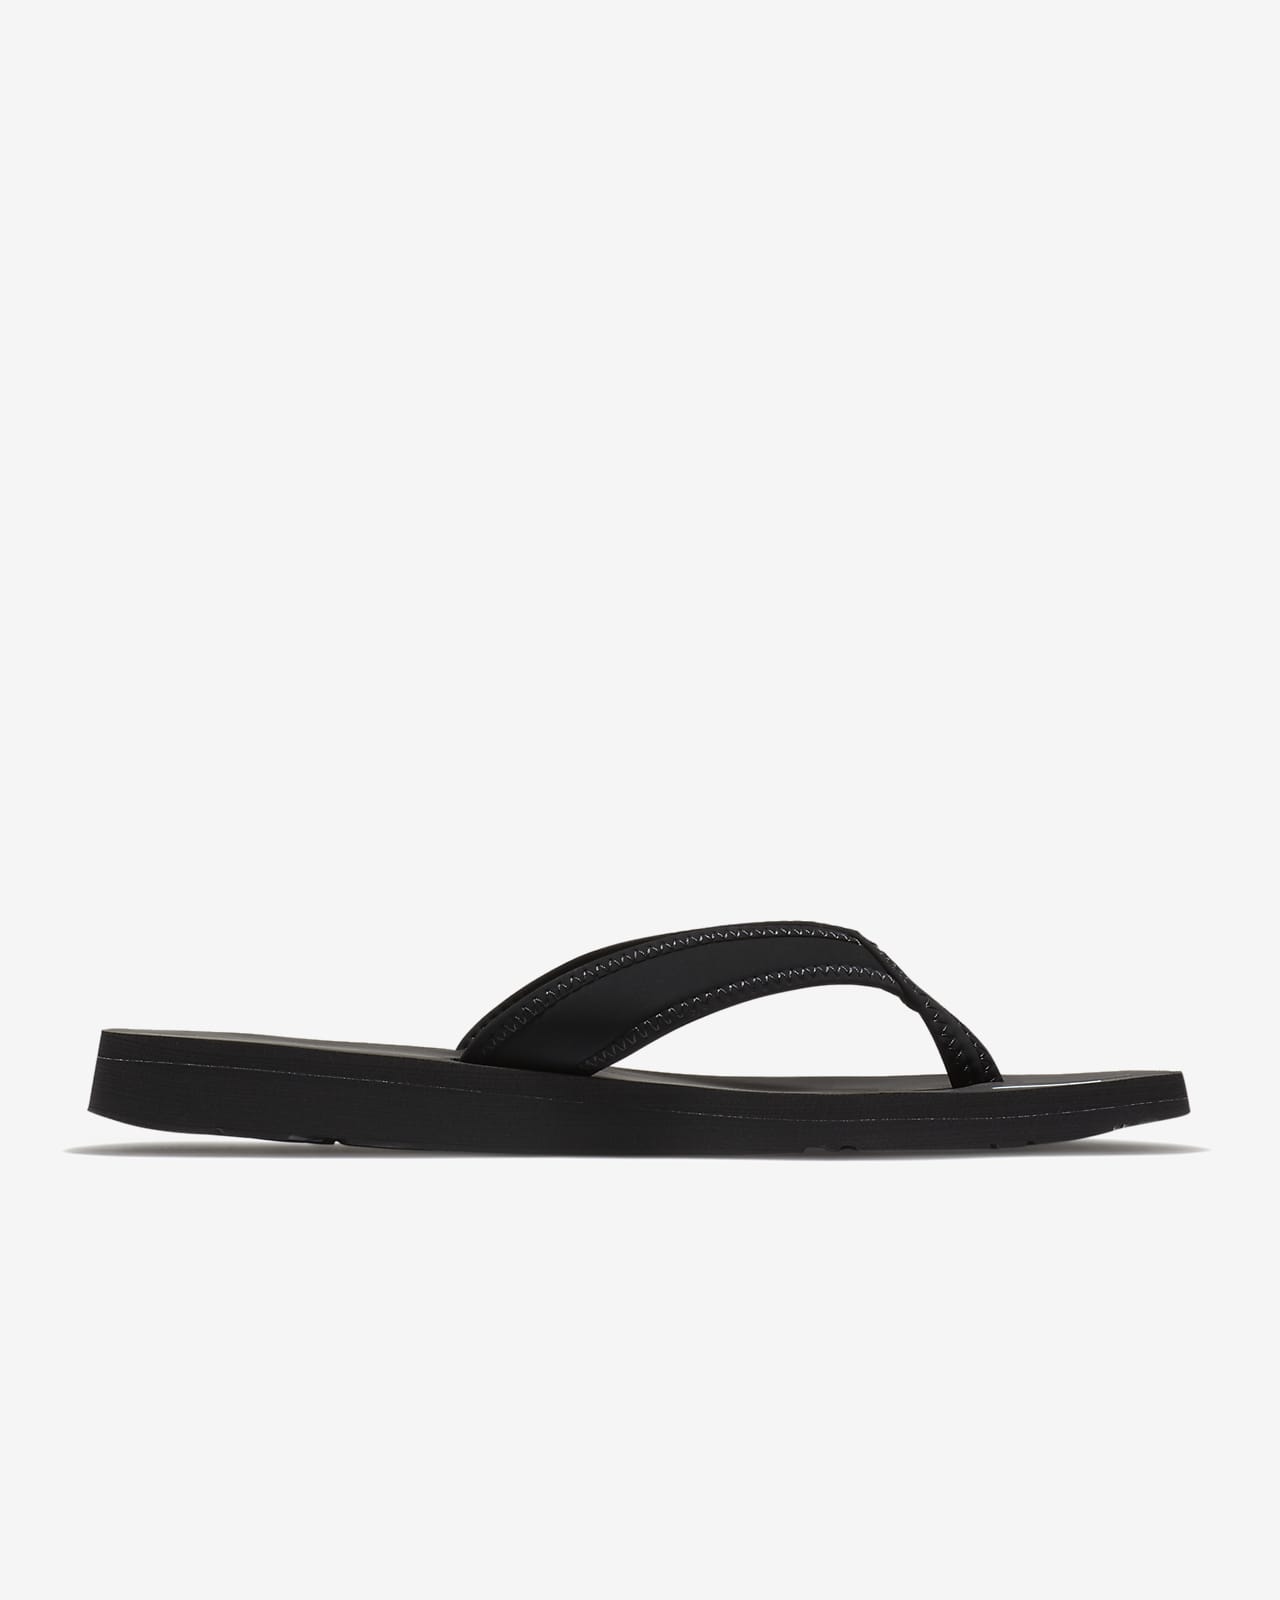 NIKE Celso Thong Sandals 314870-011 - Shiekh